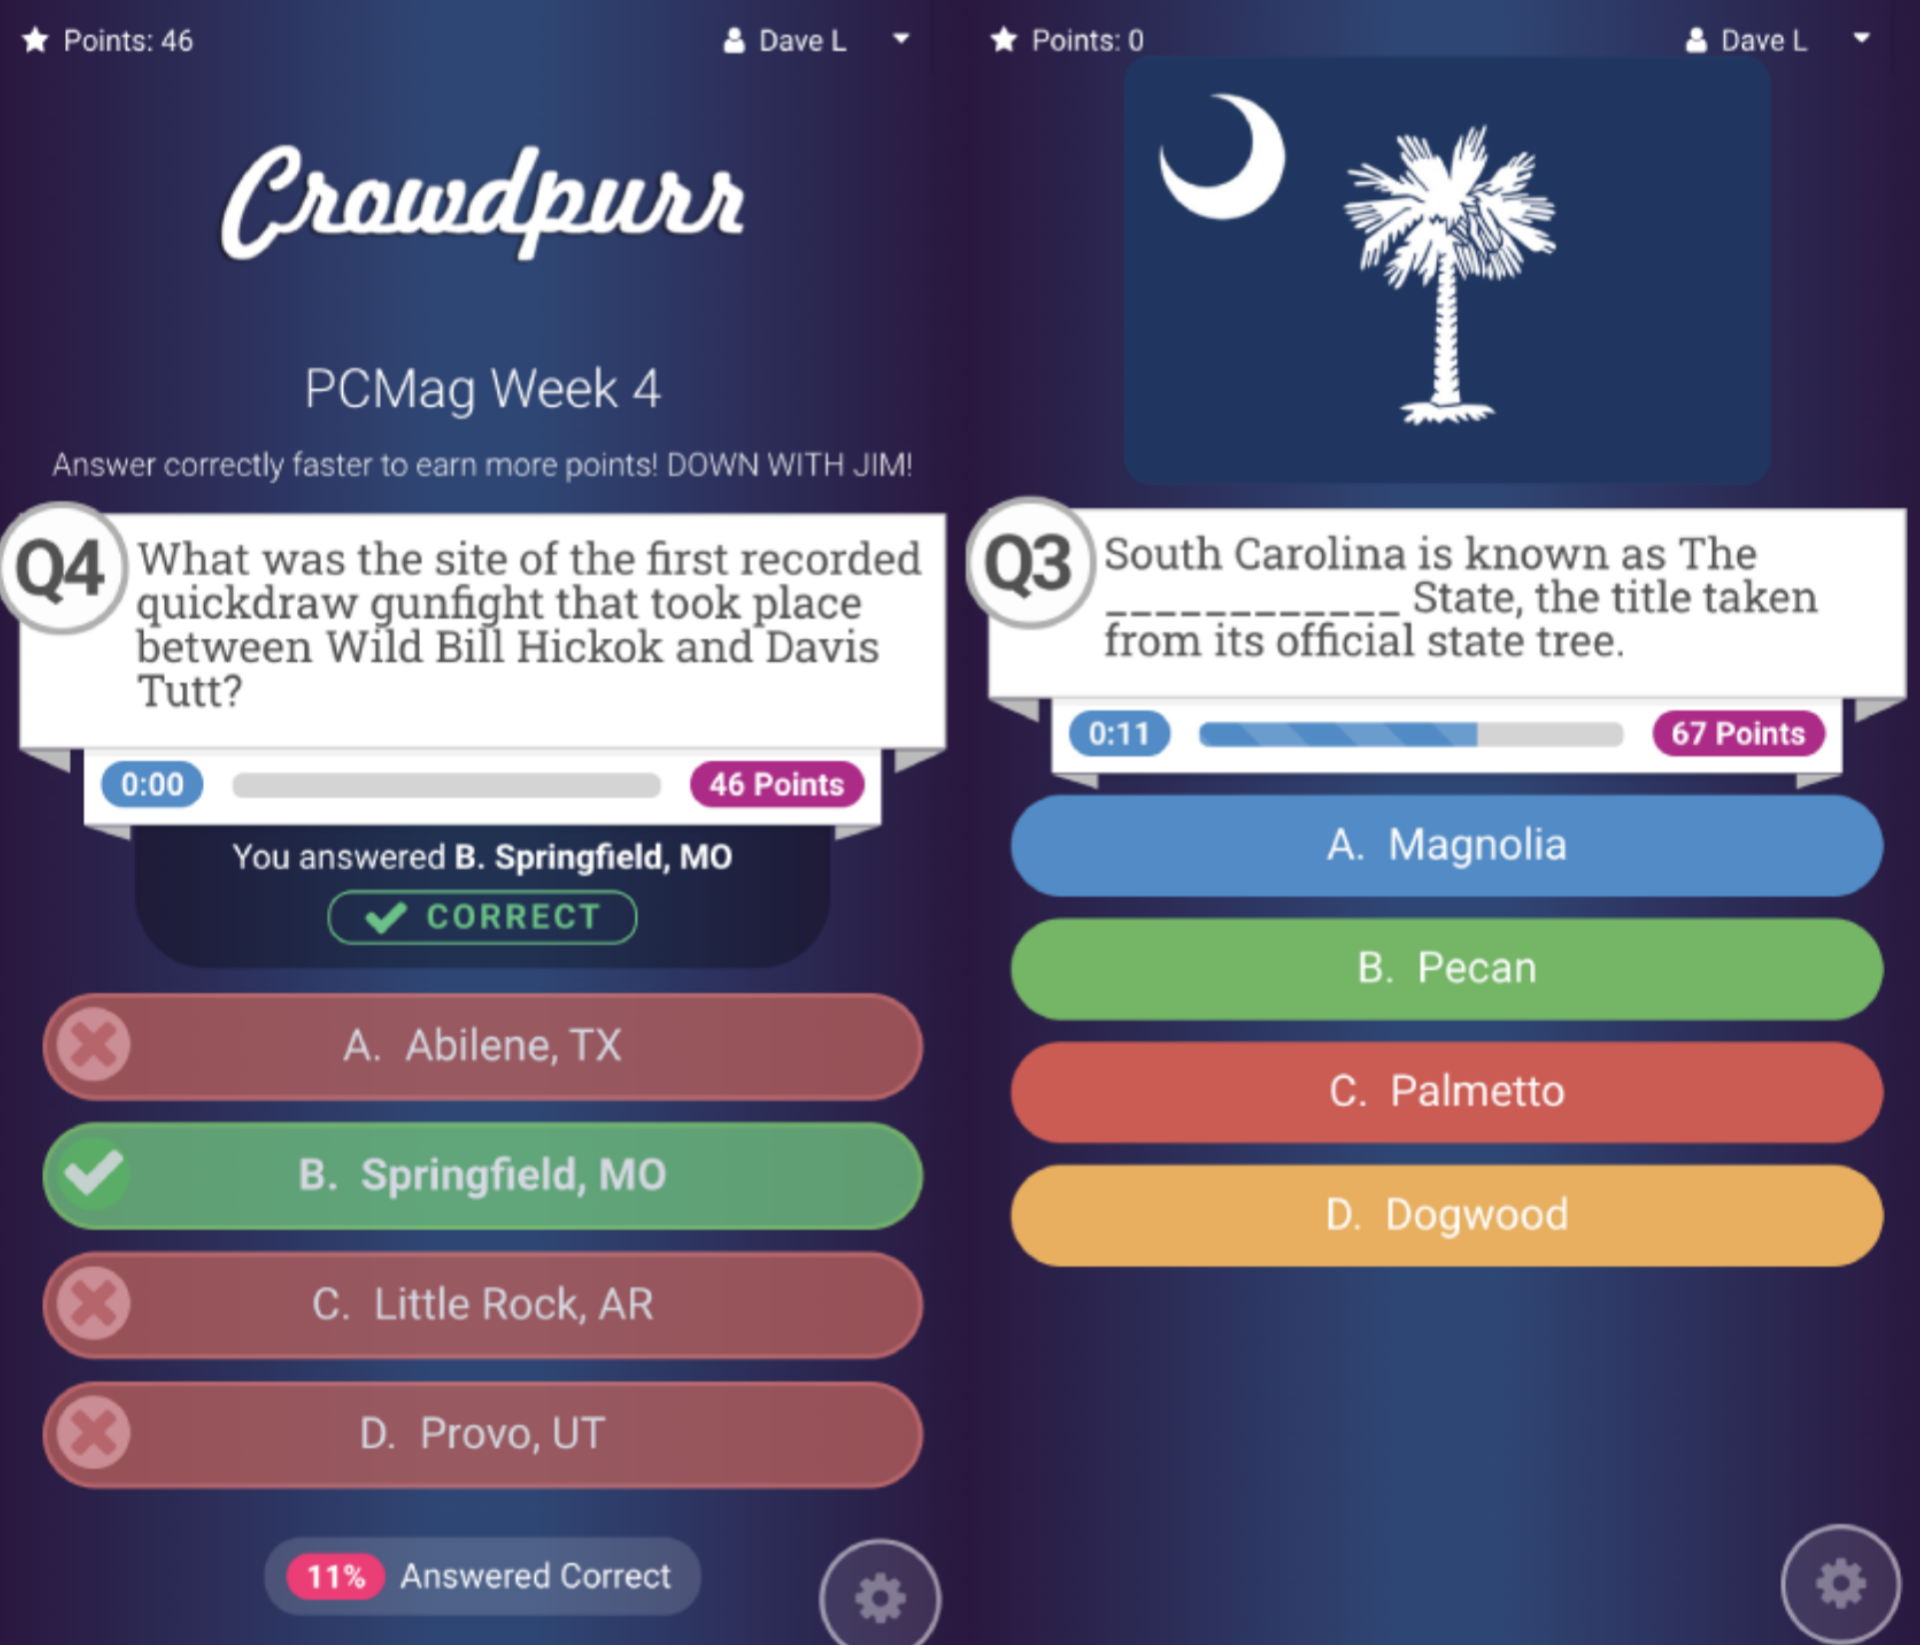 CrowdPurr – Best for Customized Games